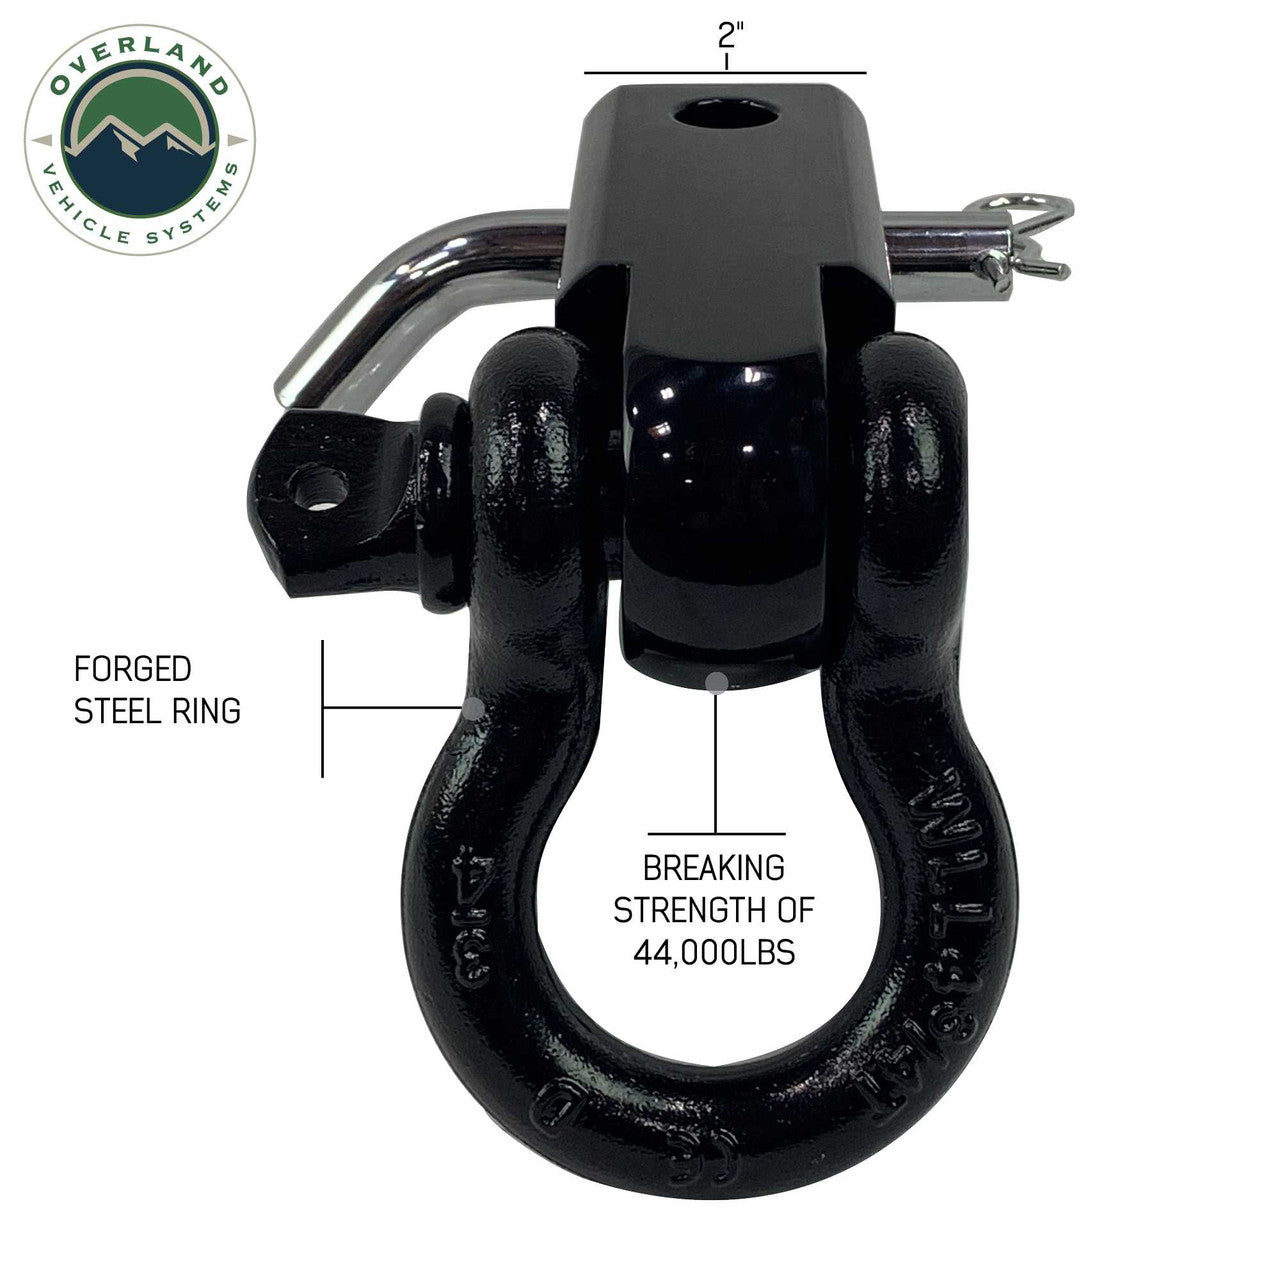 OVS Receiver Mount Recovery Shackle 3/4" 4.75 Ton Rated Black